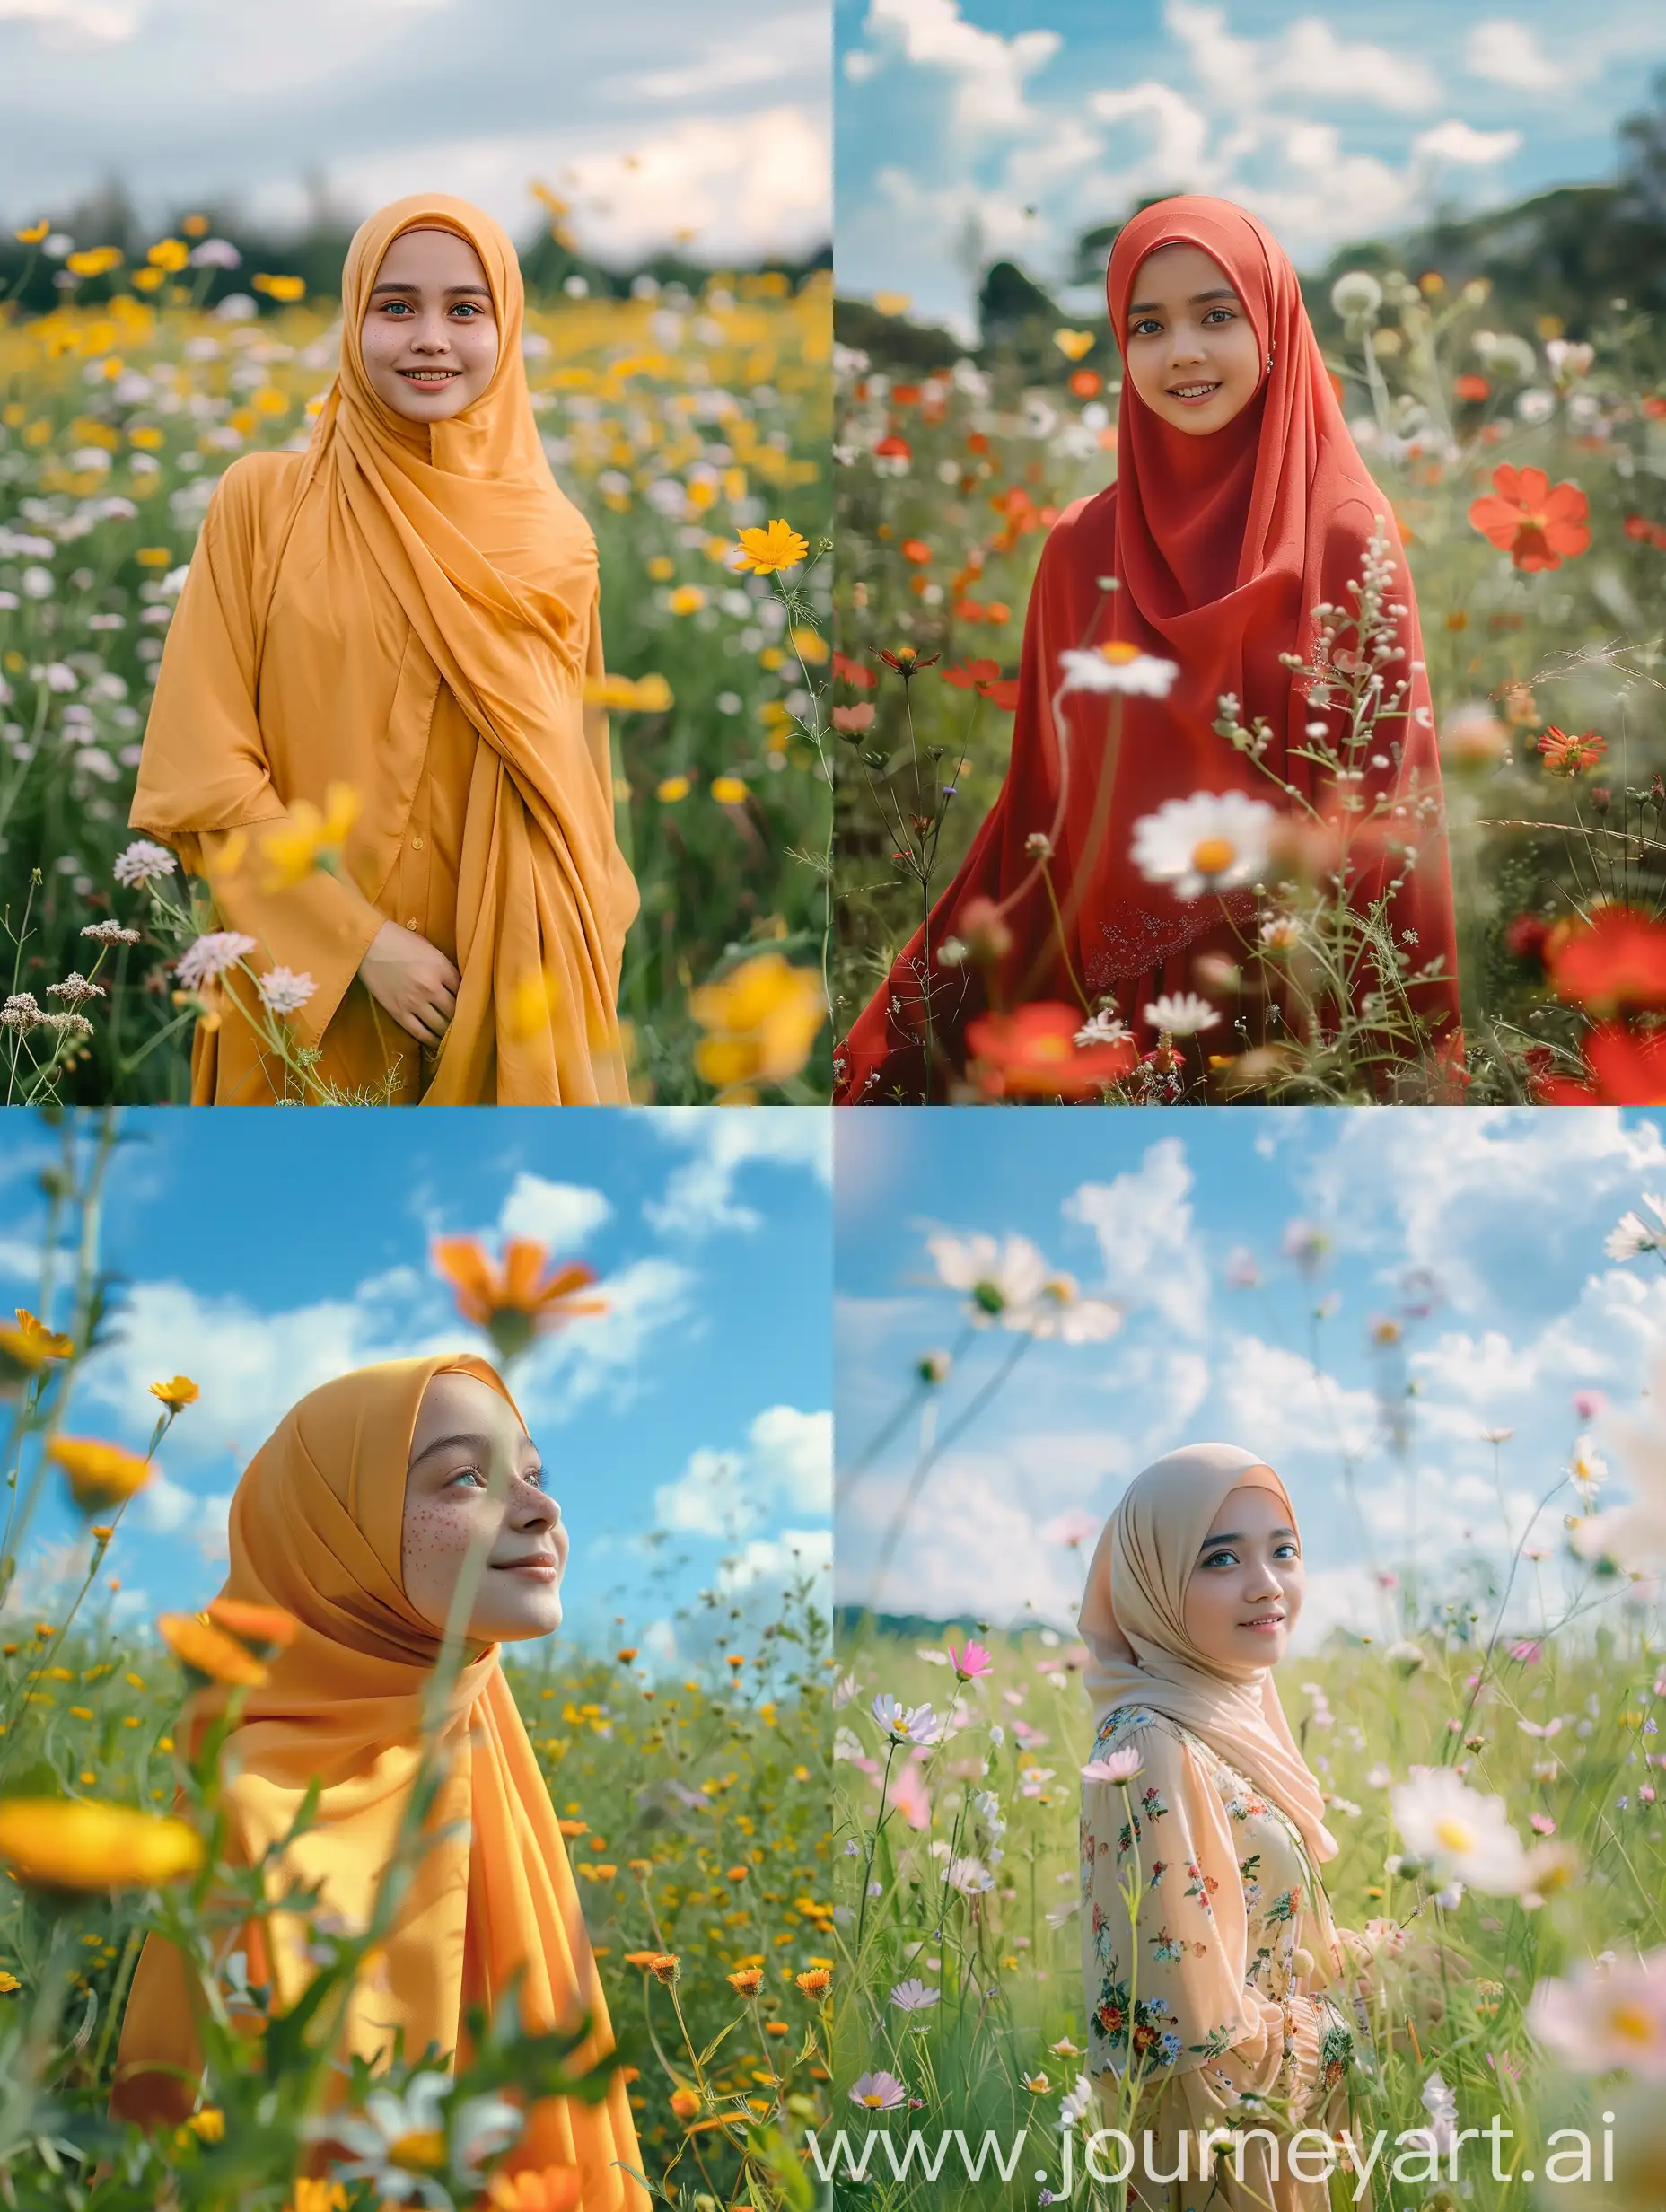 Smiling-Indonesian-Girl-with-Hijab-in-Sunny-Green-Field